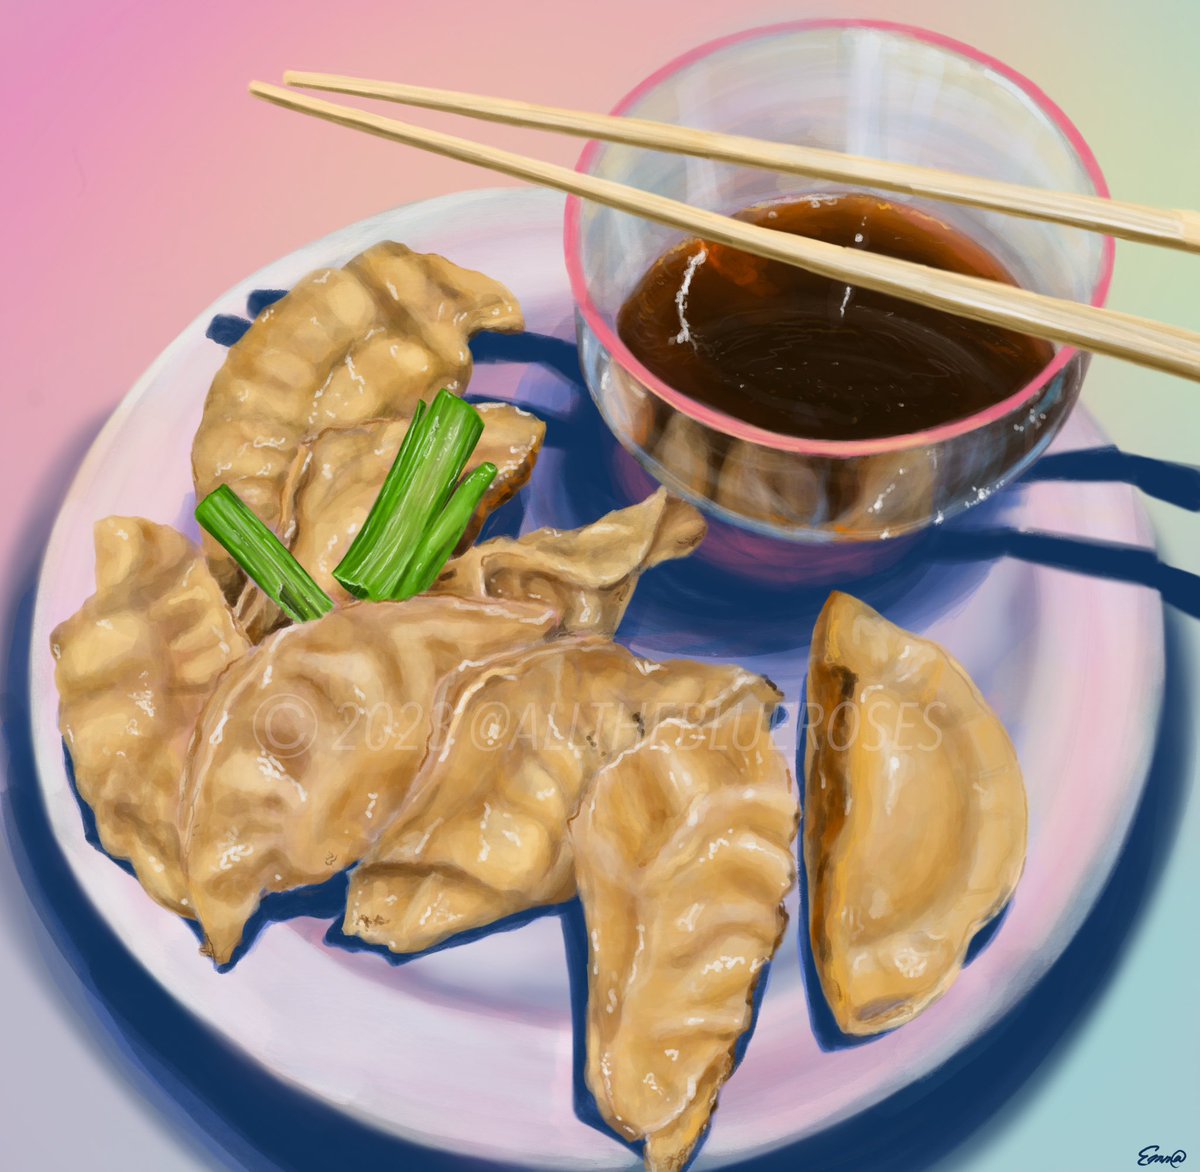 I painted some dumplings with @Procreate 🥟🥢